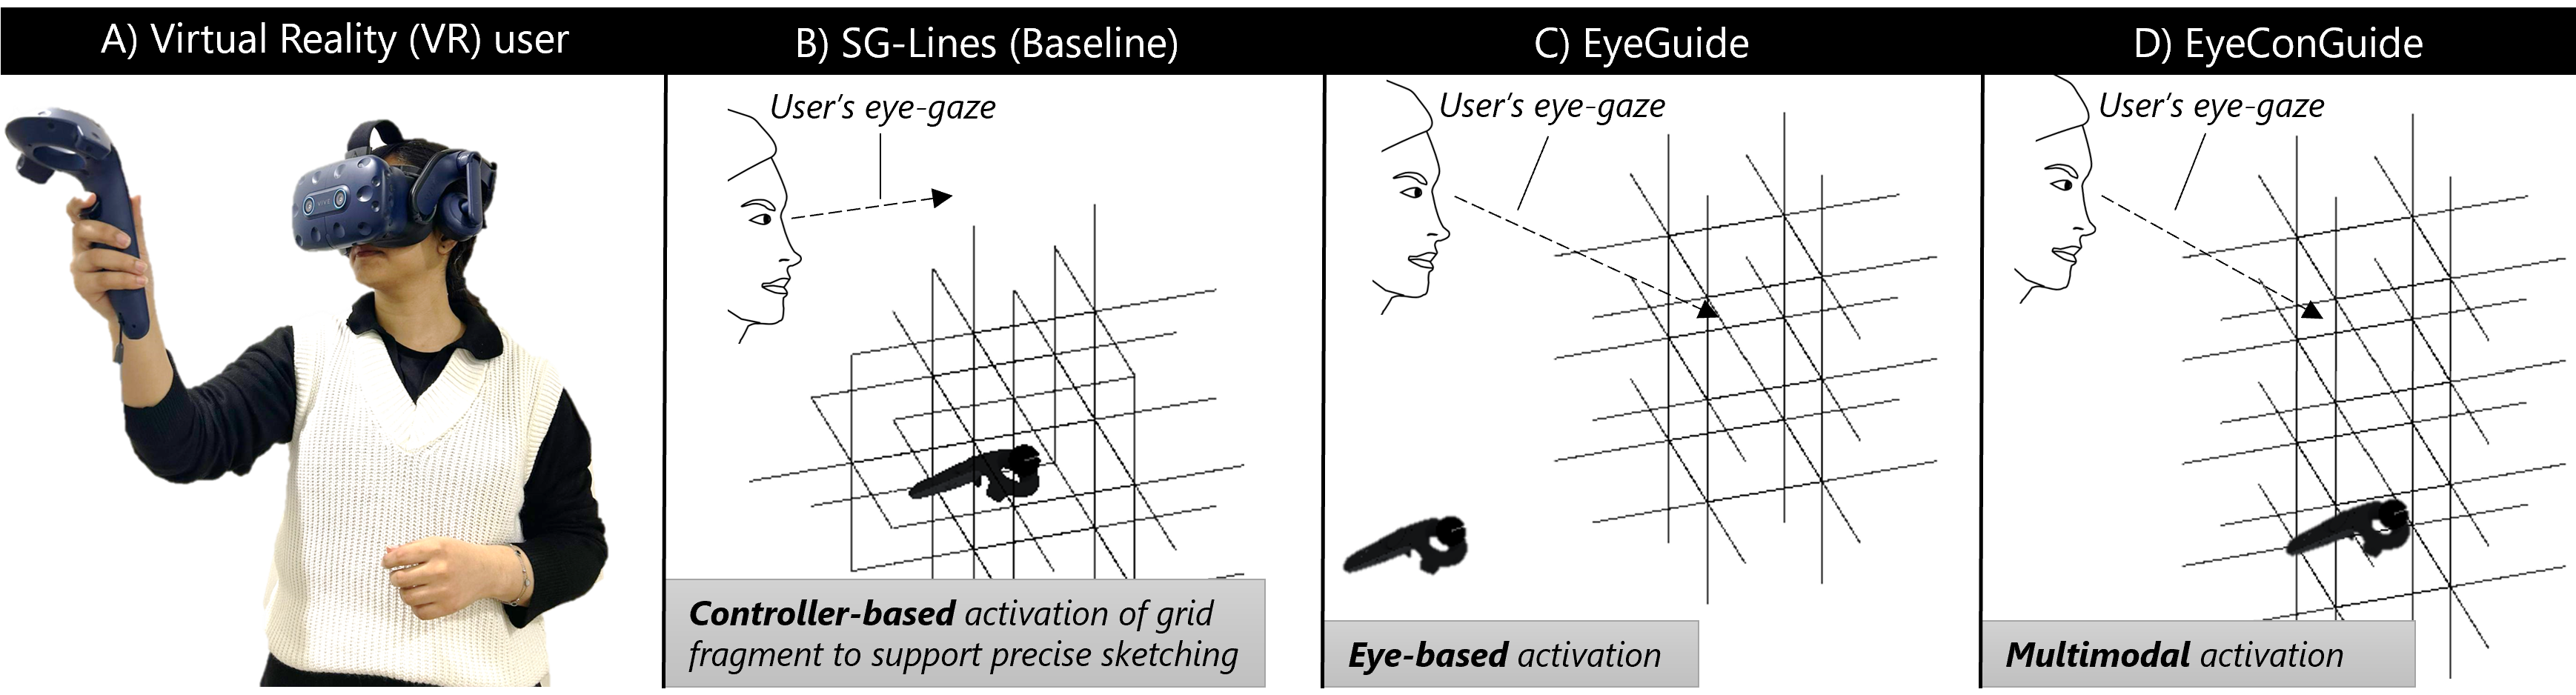 EyeGuide & EyeConGuide: Gaze-based Visual Guides to Improve 3D Sketching Systems